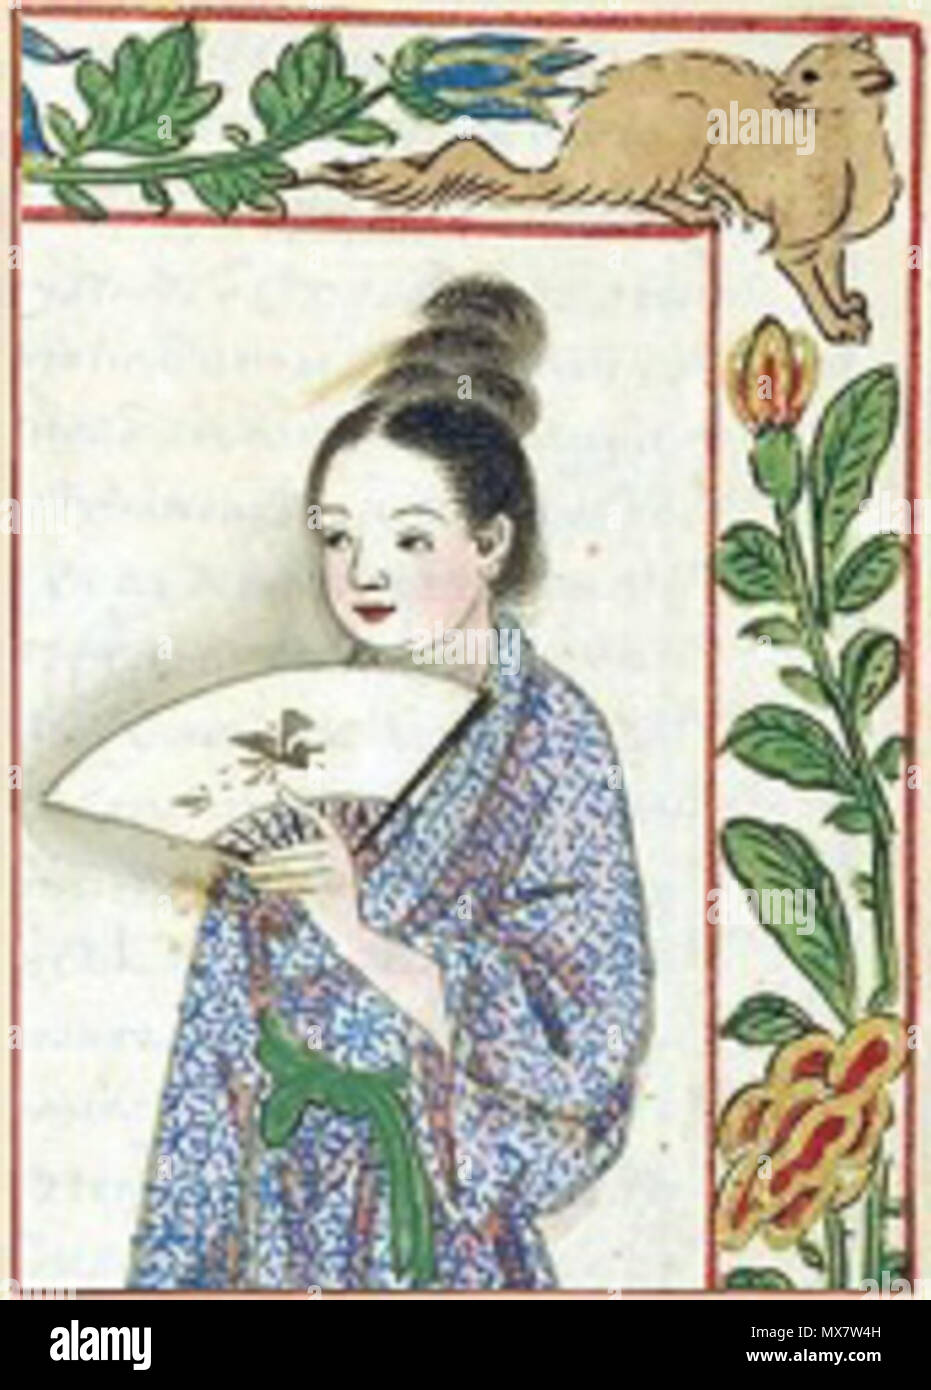 . English: Boxer Codex Manuscript Ladrones (pack of thieves), Philippines, part of the Indiana University Digital Library . circa 1590. Boxer Codex Manuscript Ladrones (pack of thieves) 200 Example-Portrait Japanese-Iinhabitant-in-the-Philippines Stock Photo